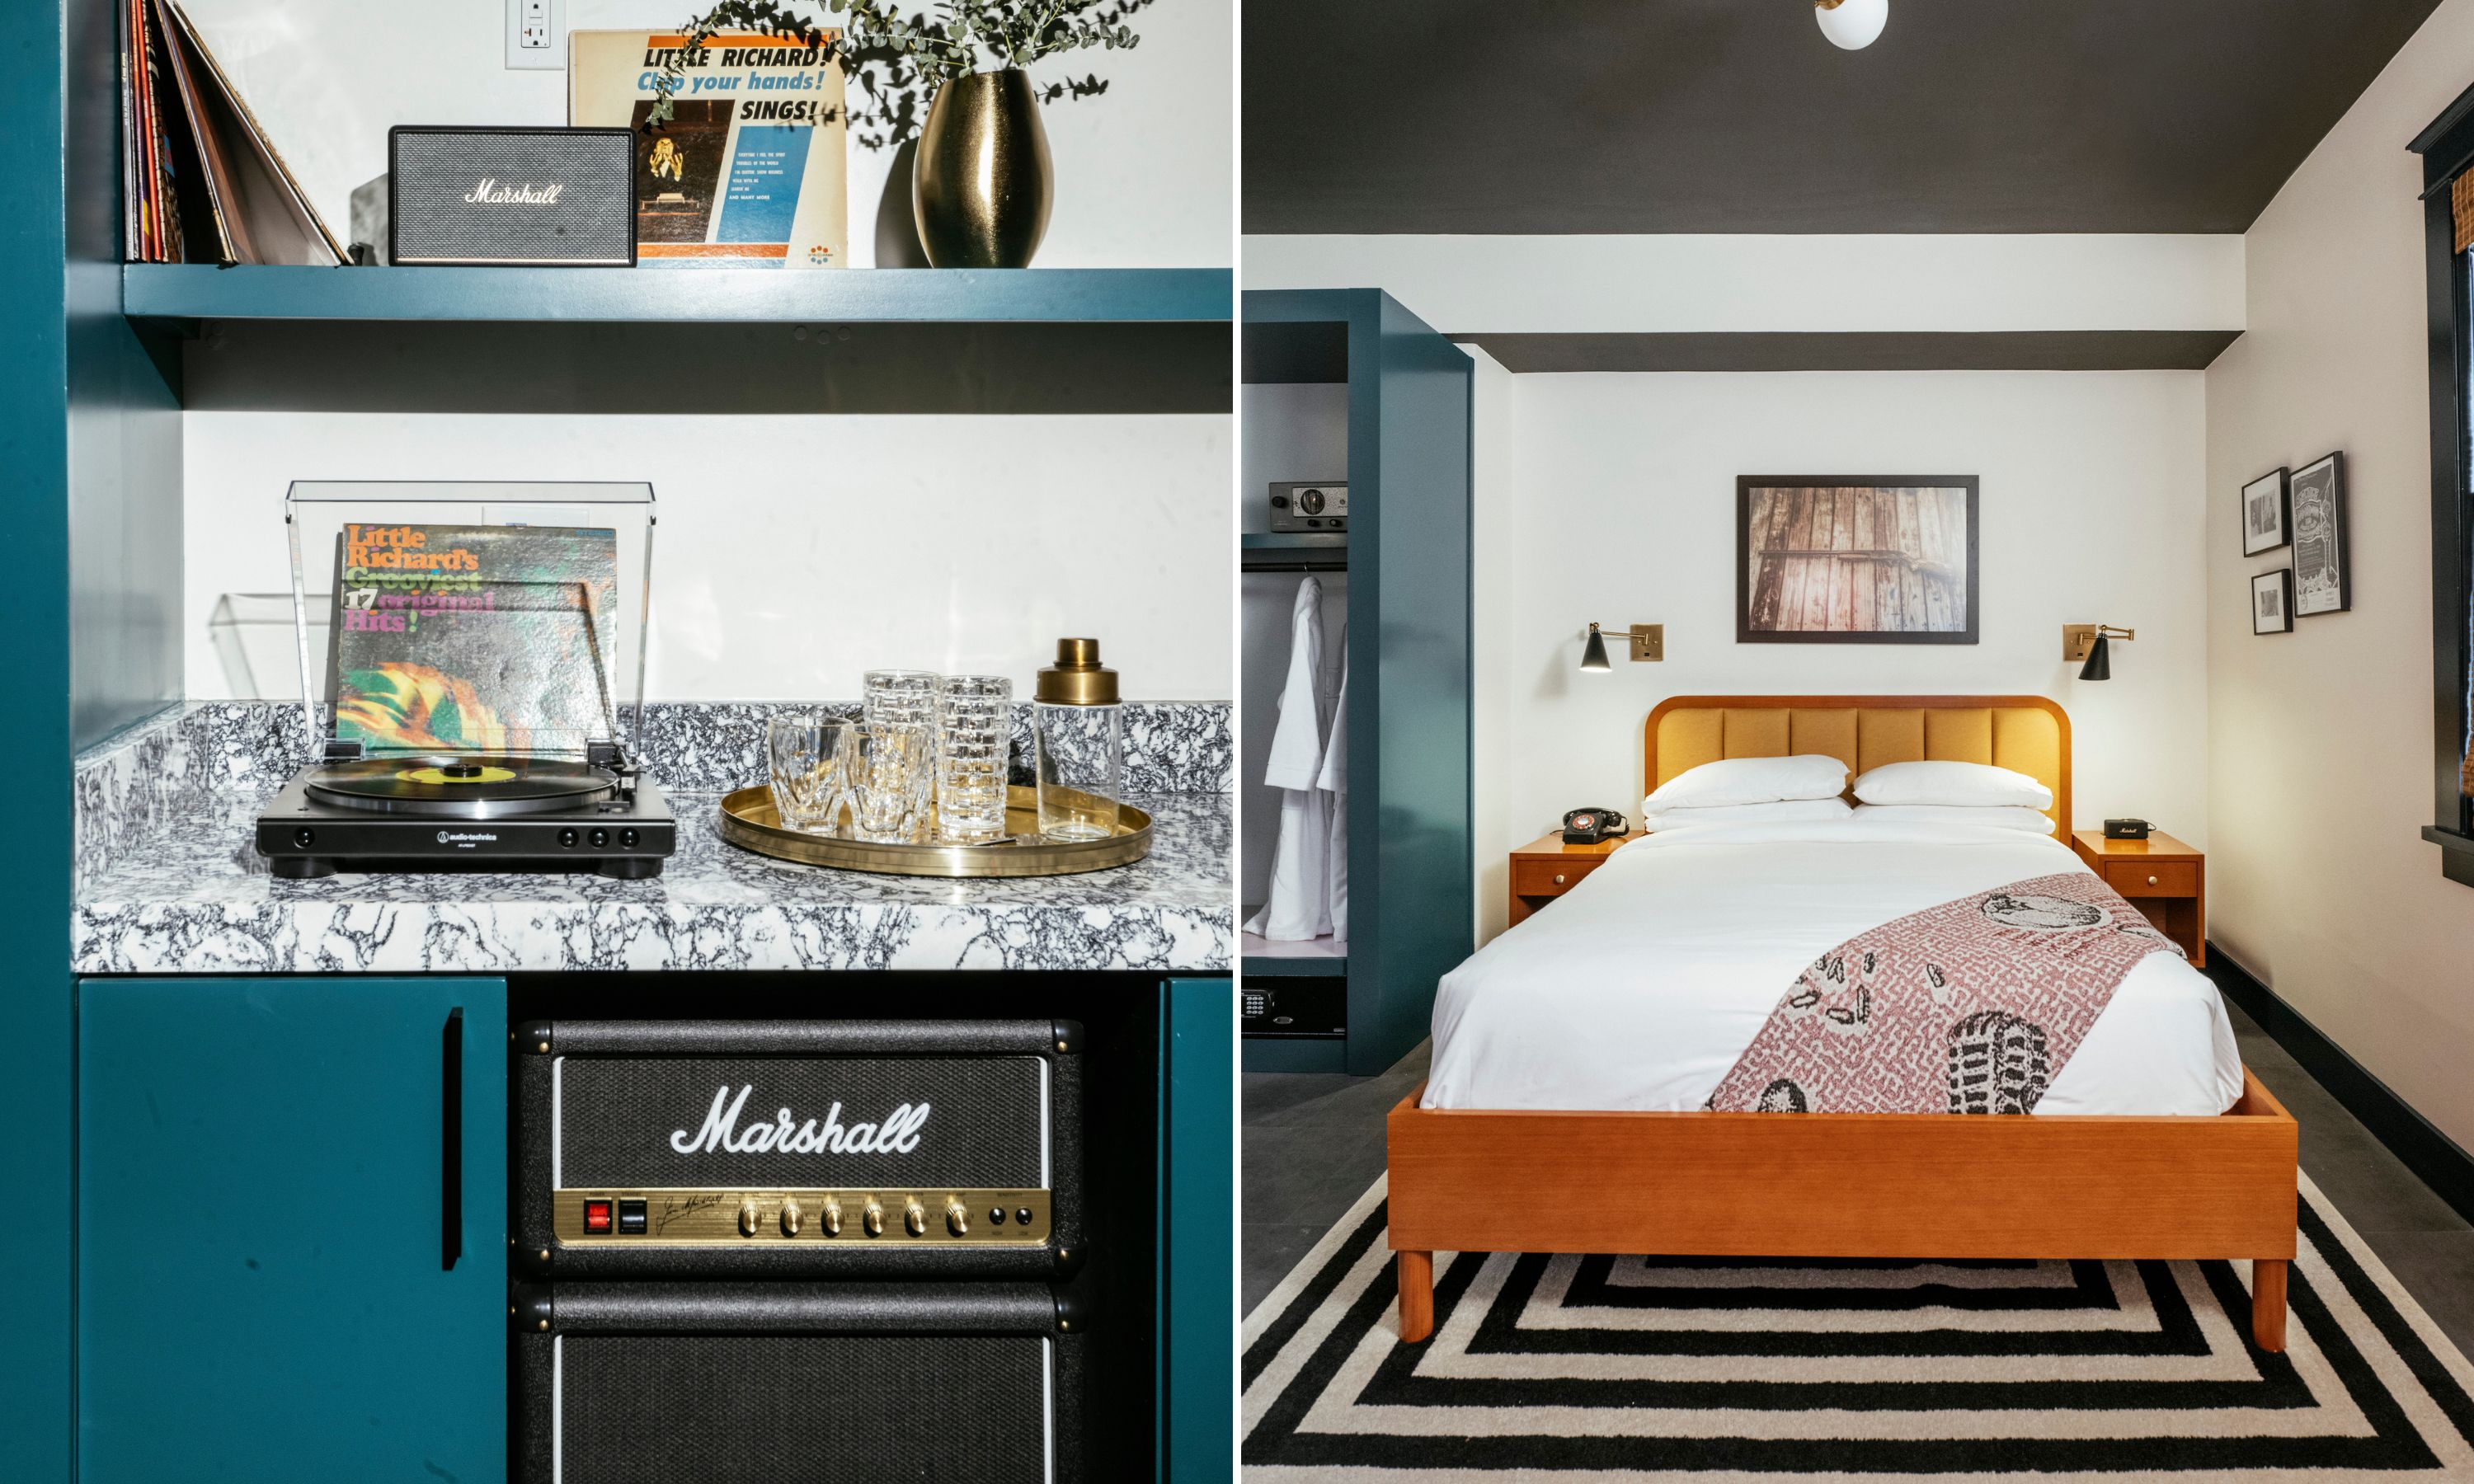 A collage of two images: a navy shelf with a record player and amp; a bedroom with a black and white geometric rug and white bed in a wood frame.